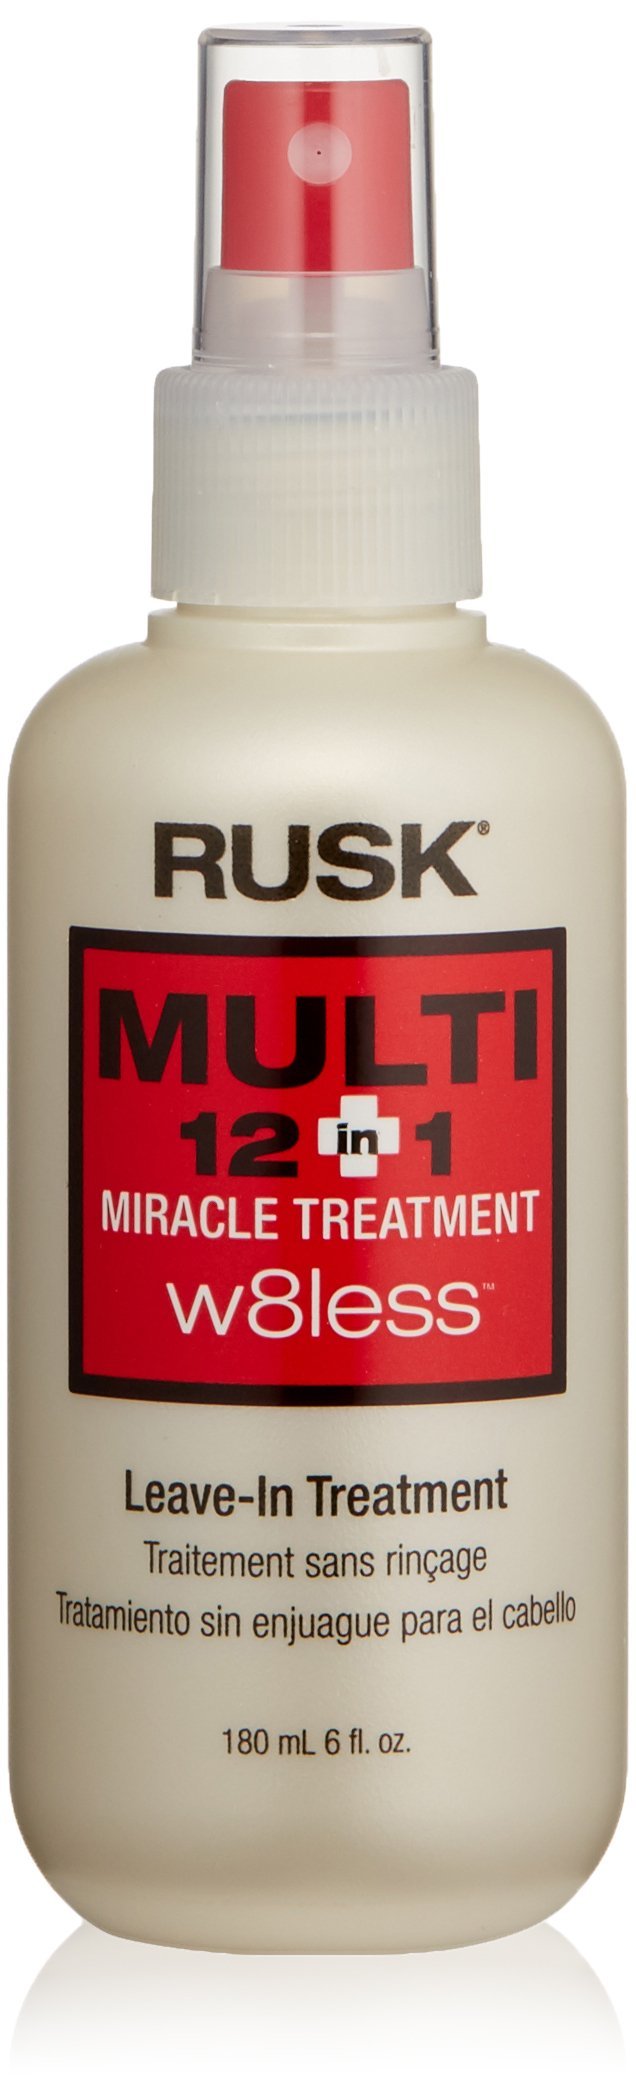 Rusk W8less Multi 12-in-1 Miracle Leave-In Treatment 6 fl Oz